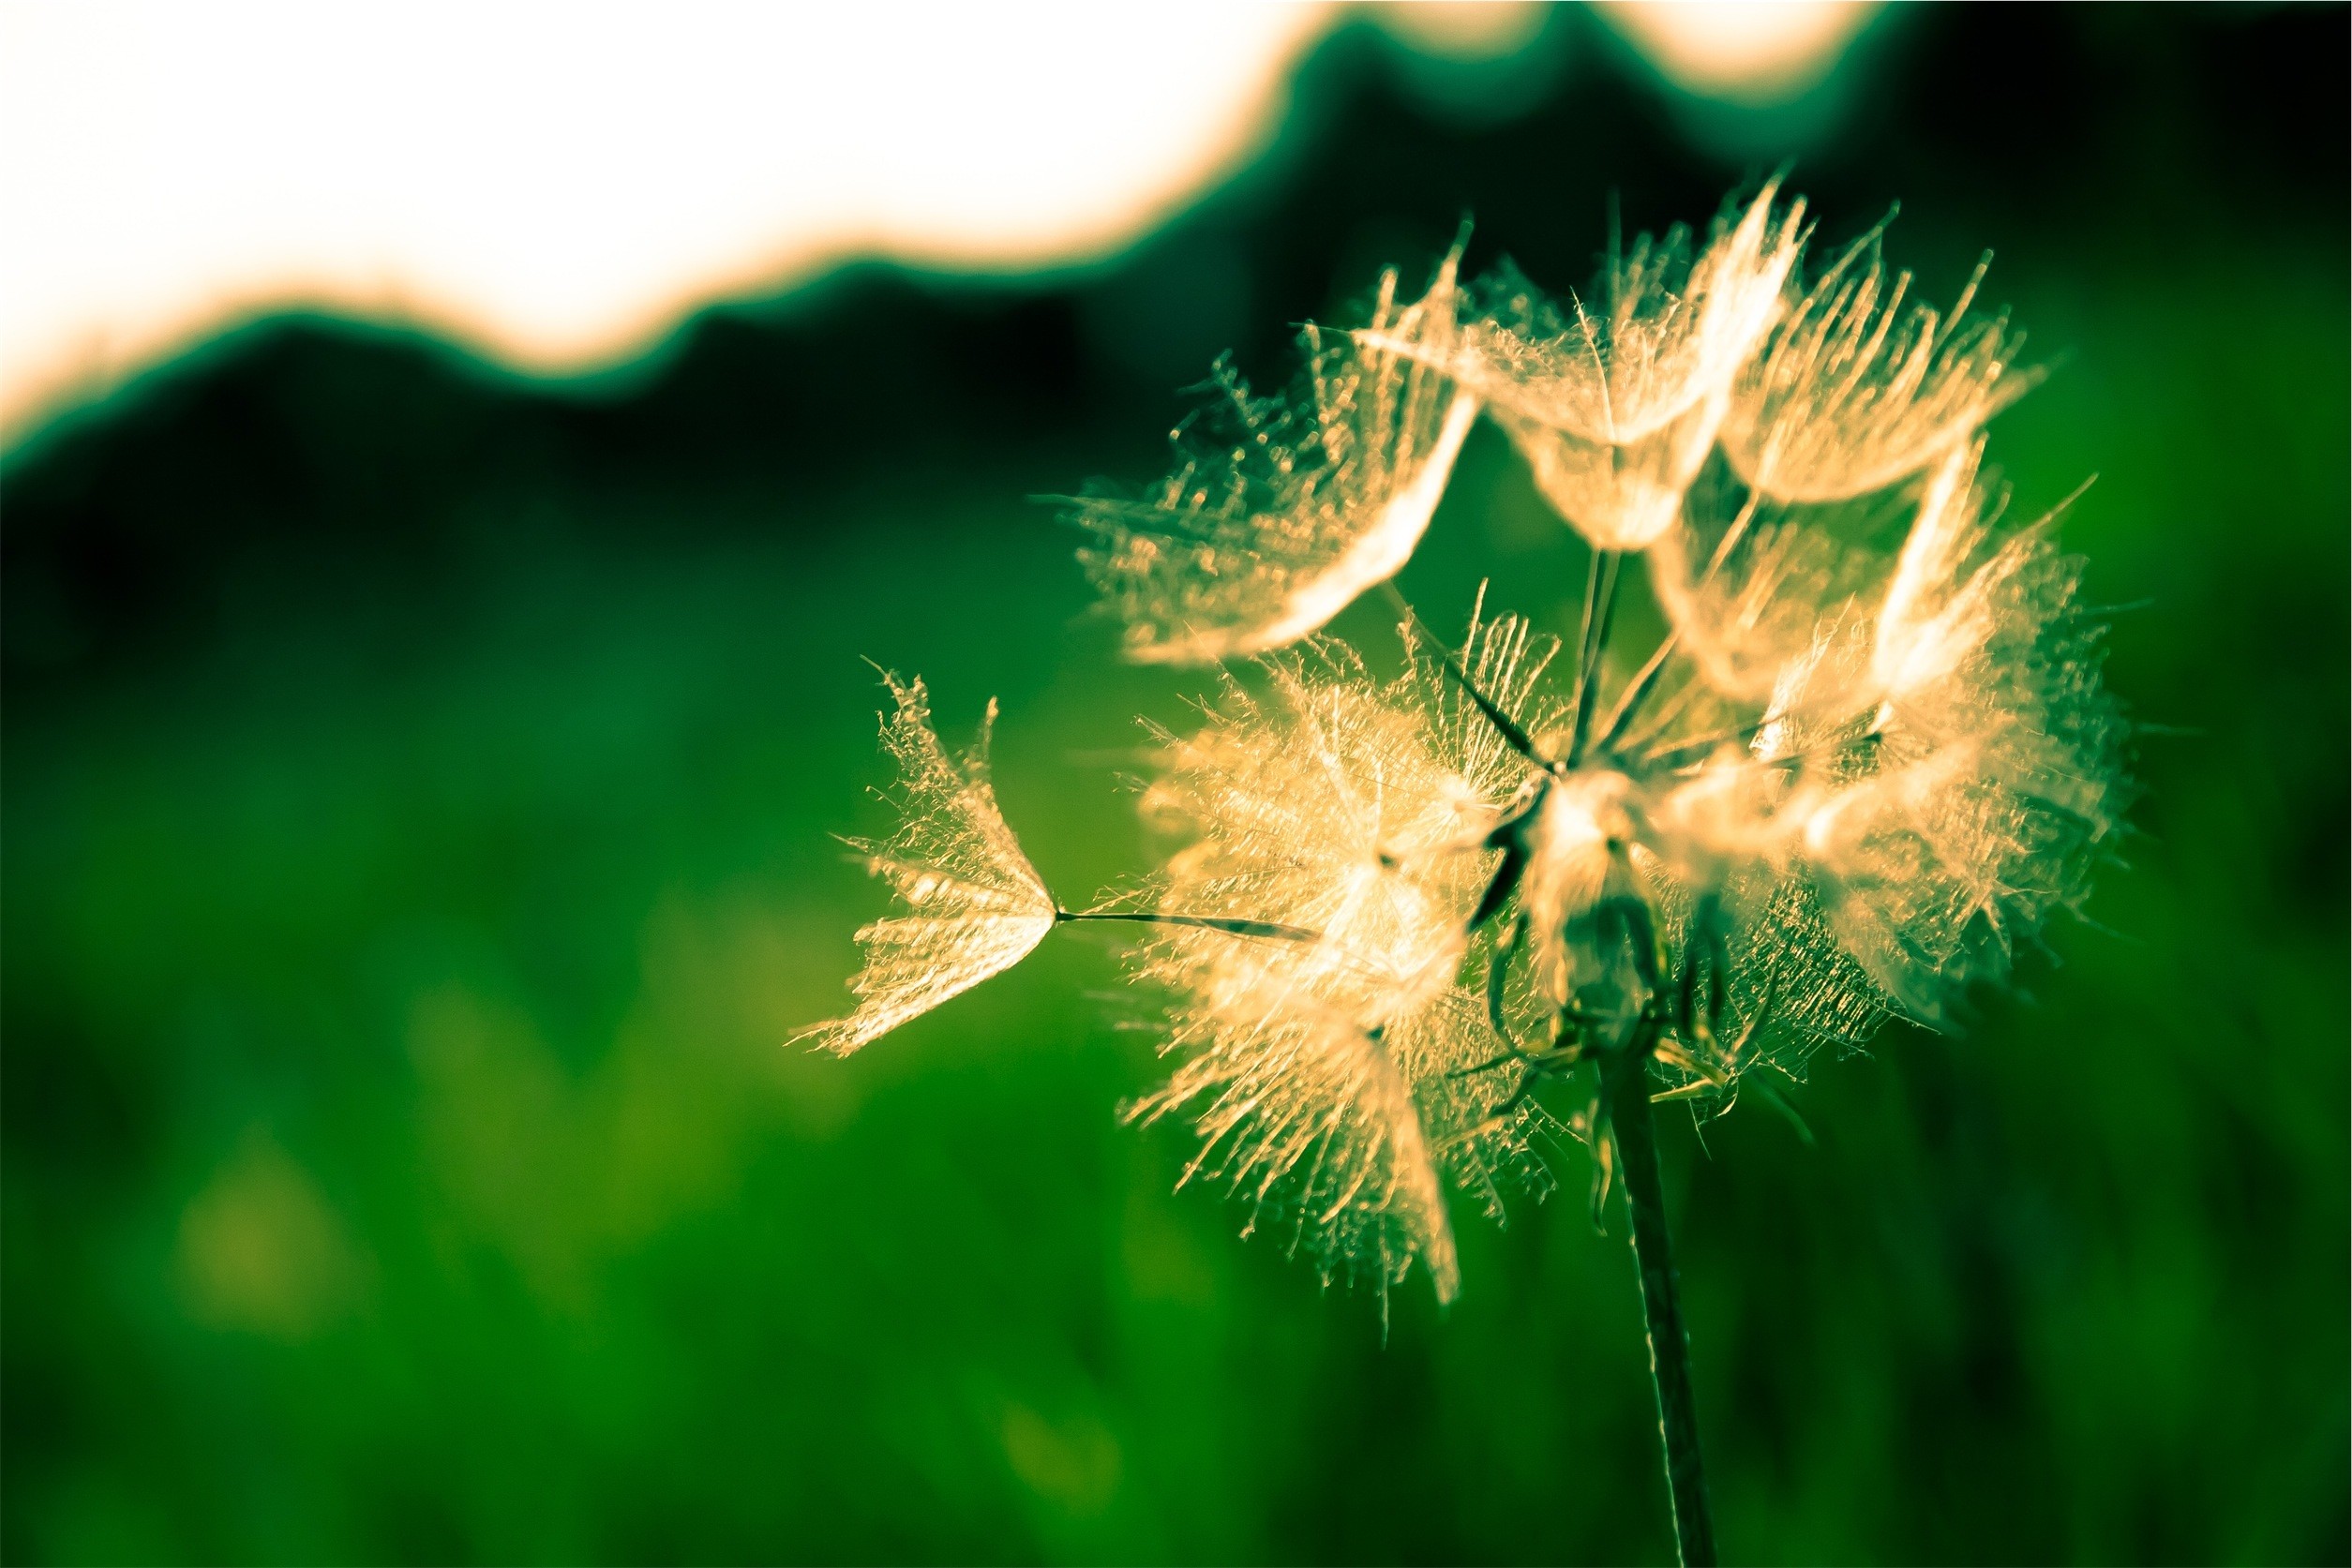 2509x1673 Free Images : tree, nature, grass, branch, blossom, light, white, meadow,  dandelion, sunlight, leaf, flower, summer, sparkler, green, natural,  yellow, ...